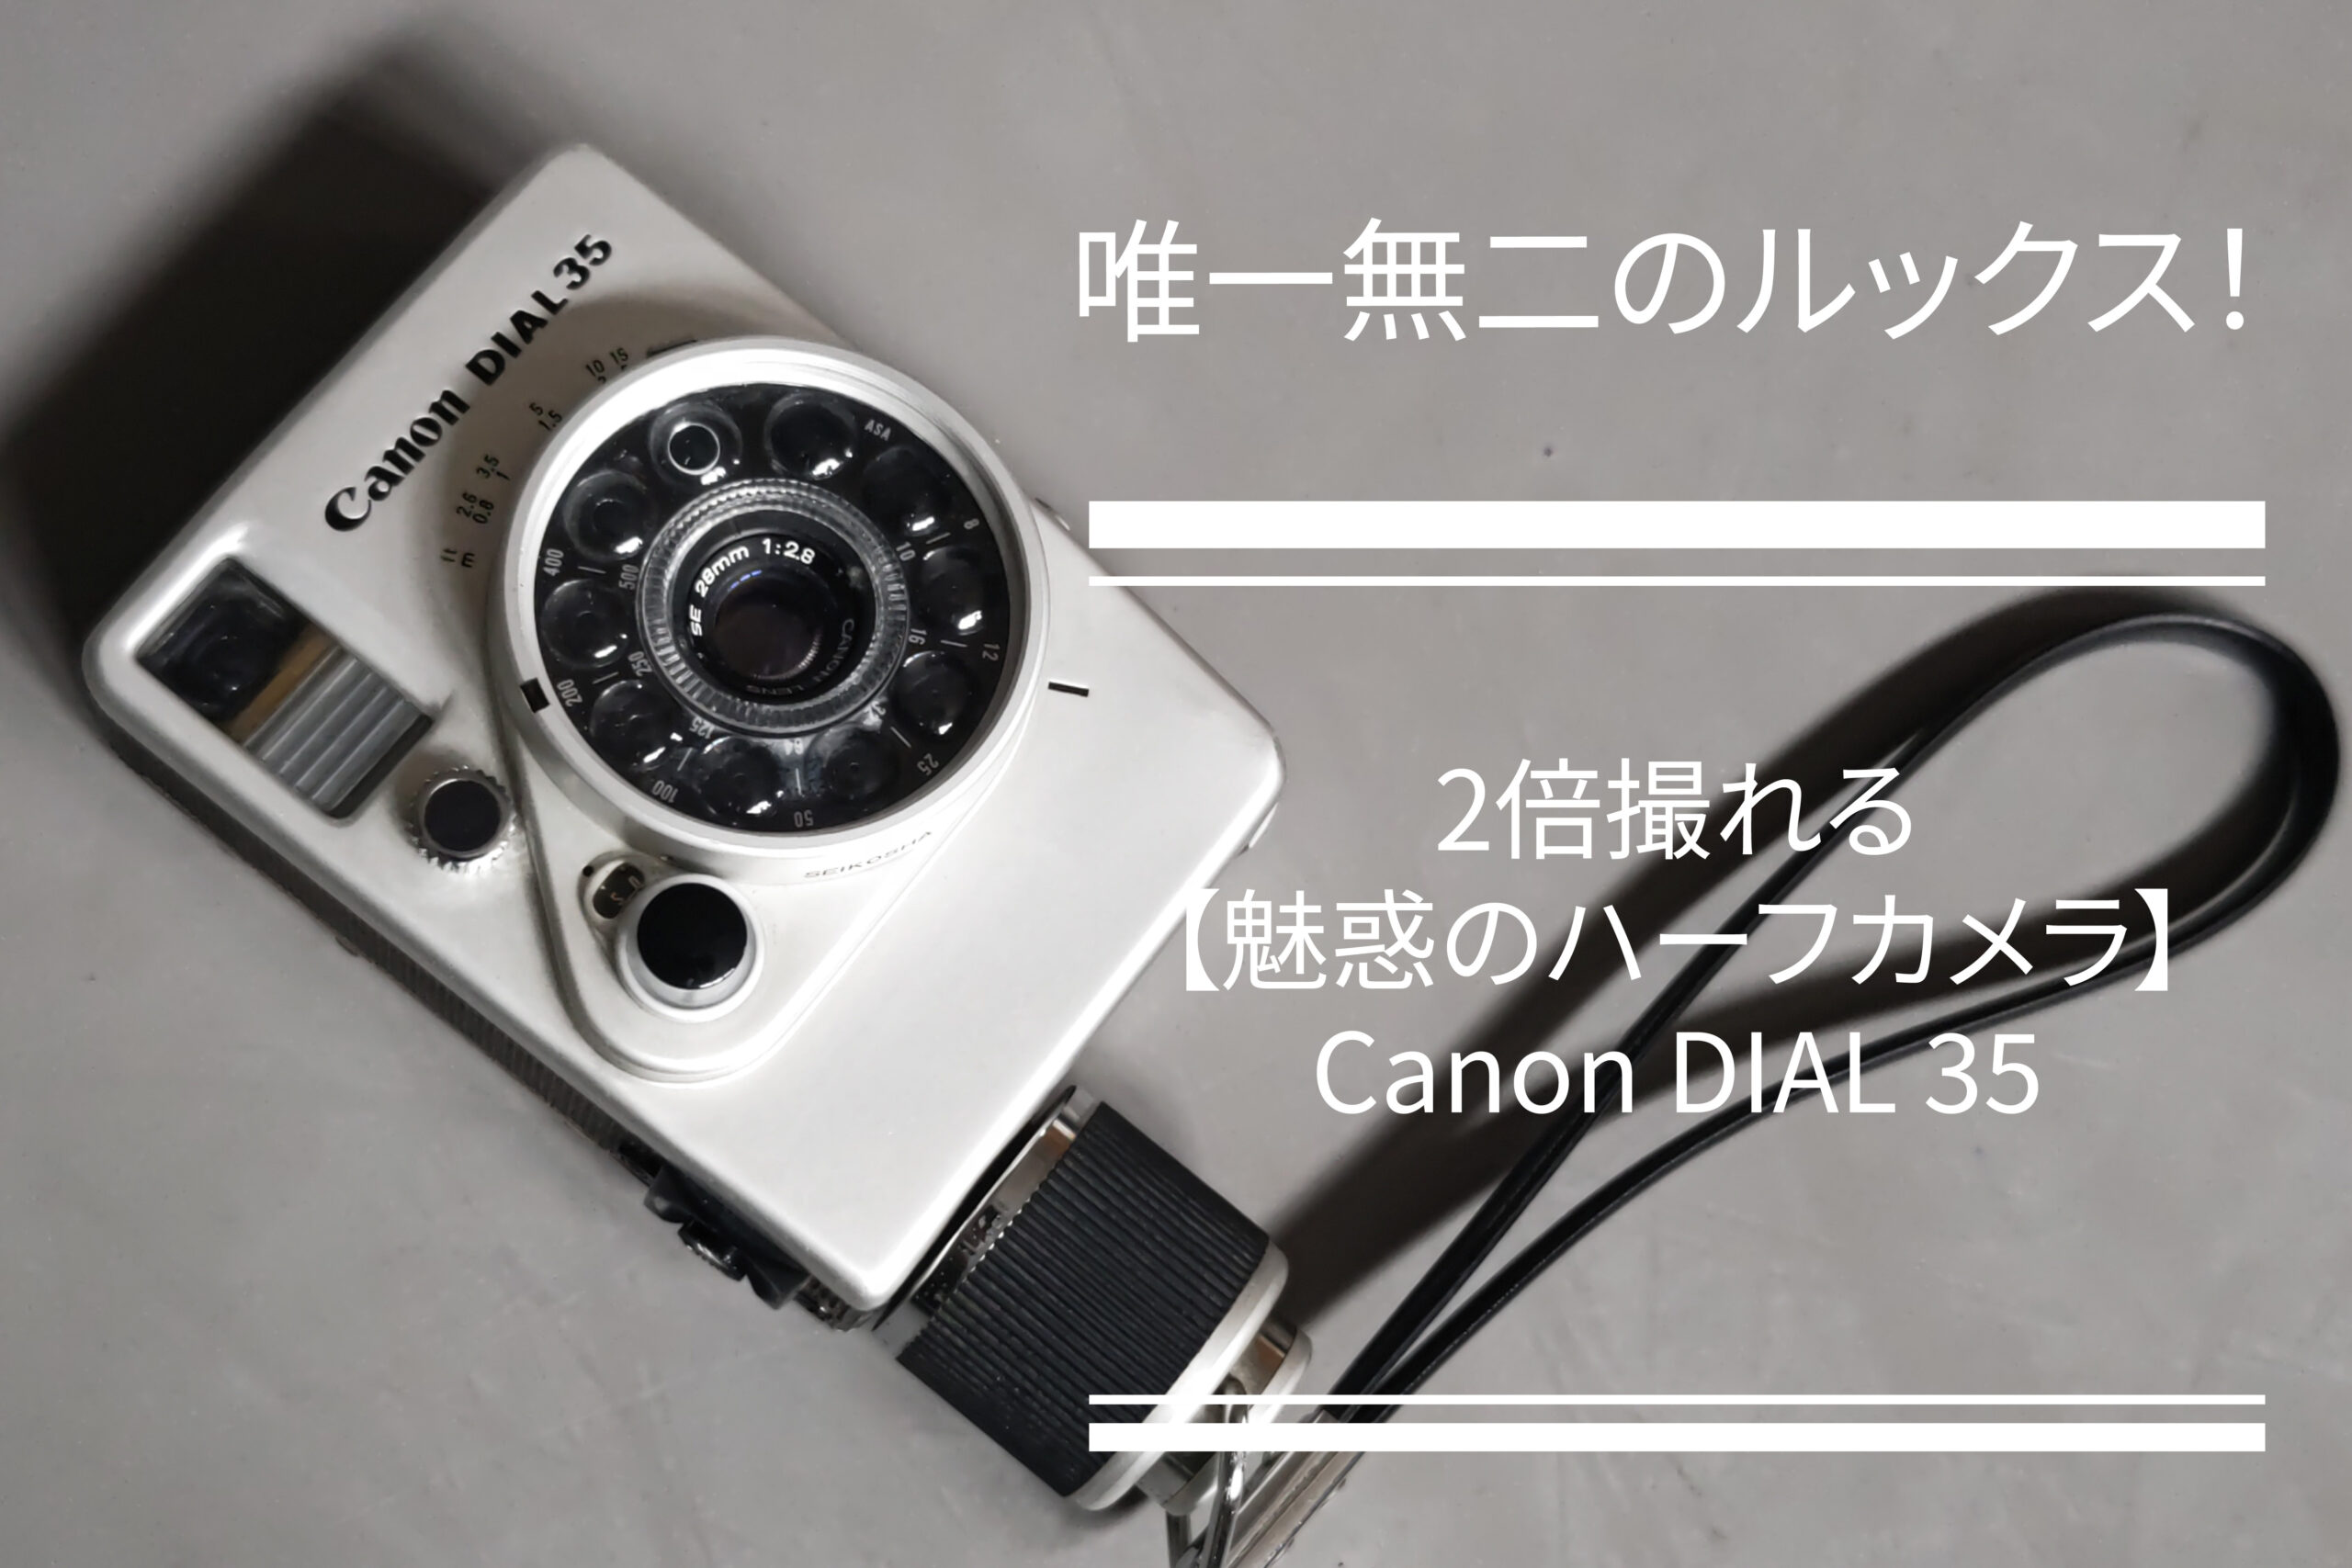 Canon Dial 35-2 ジャンク-